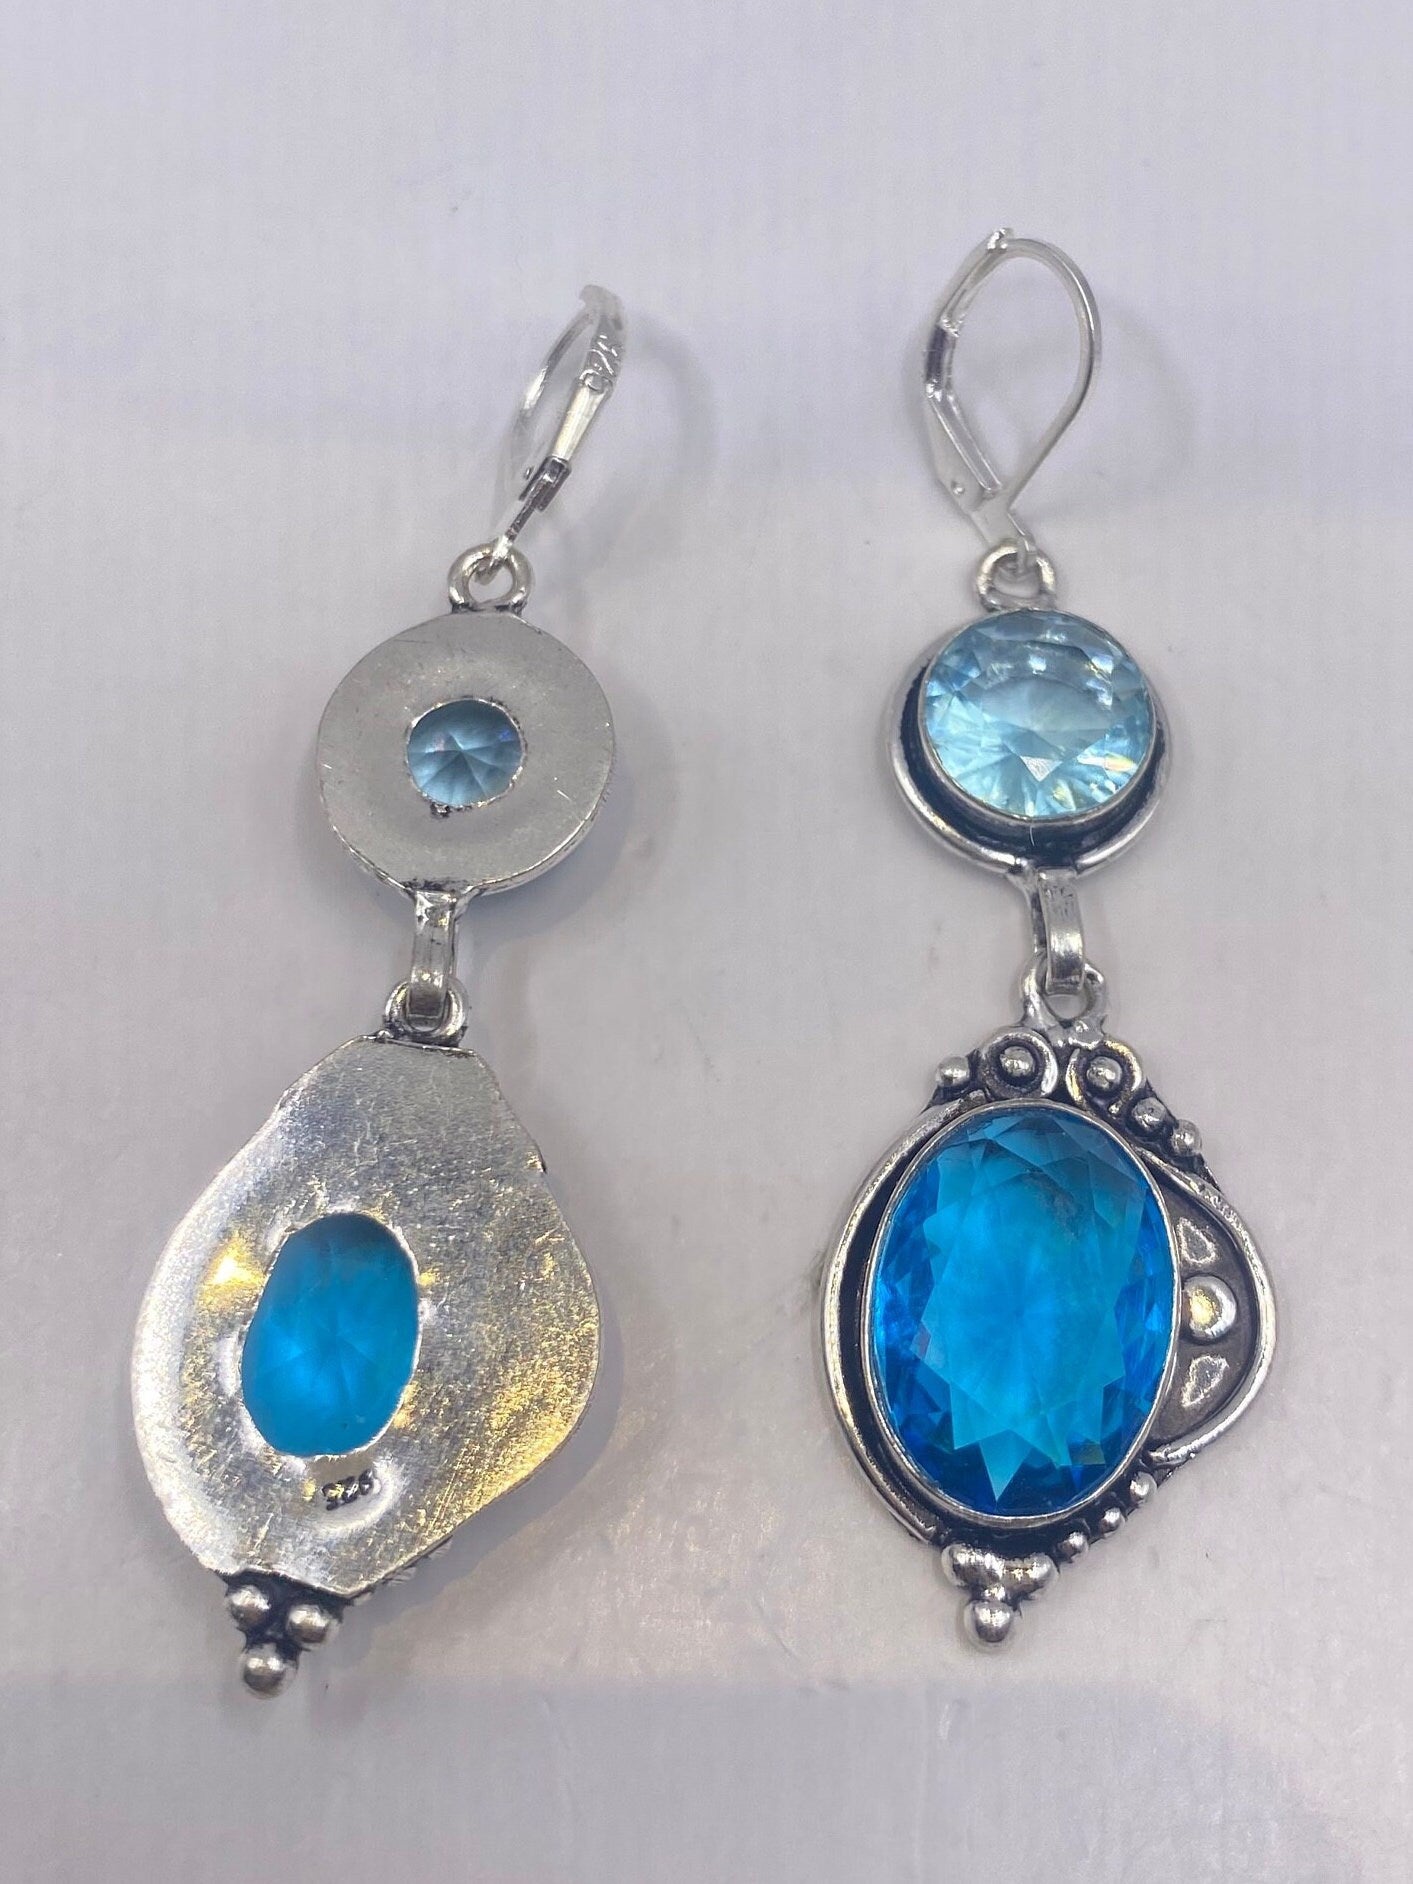 Antique Vintage Blue Topaz and Volcanic Glass Silver Dangle Earrings